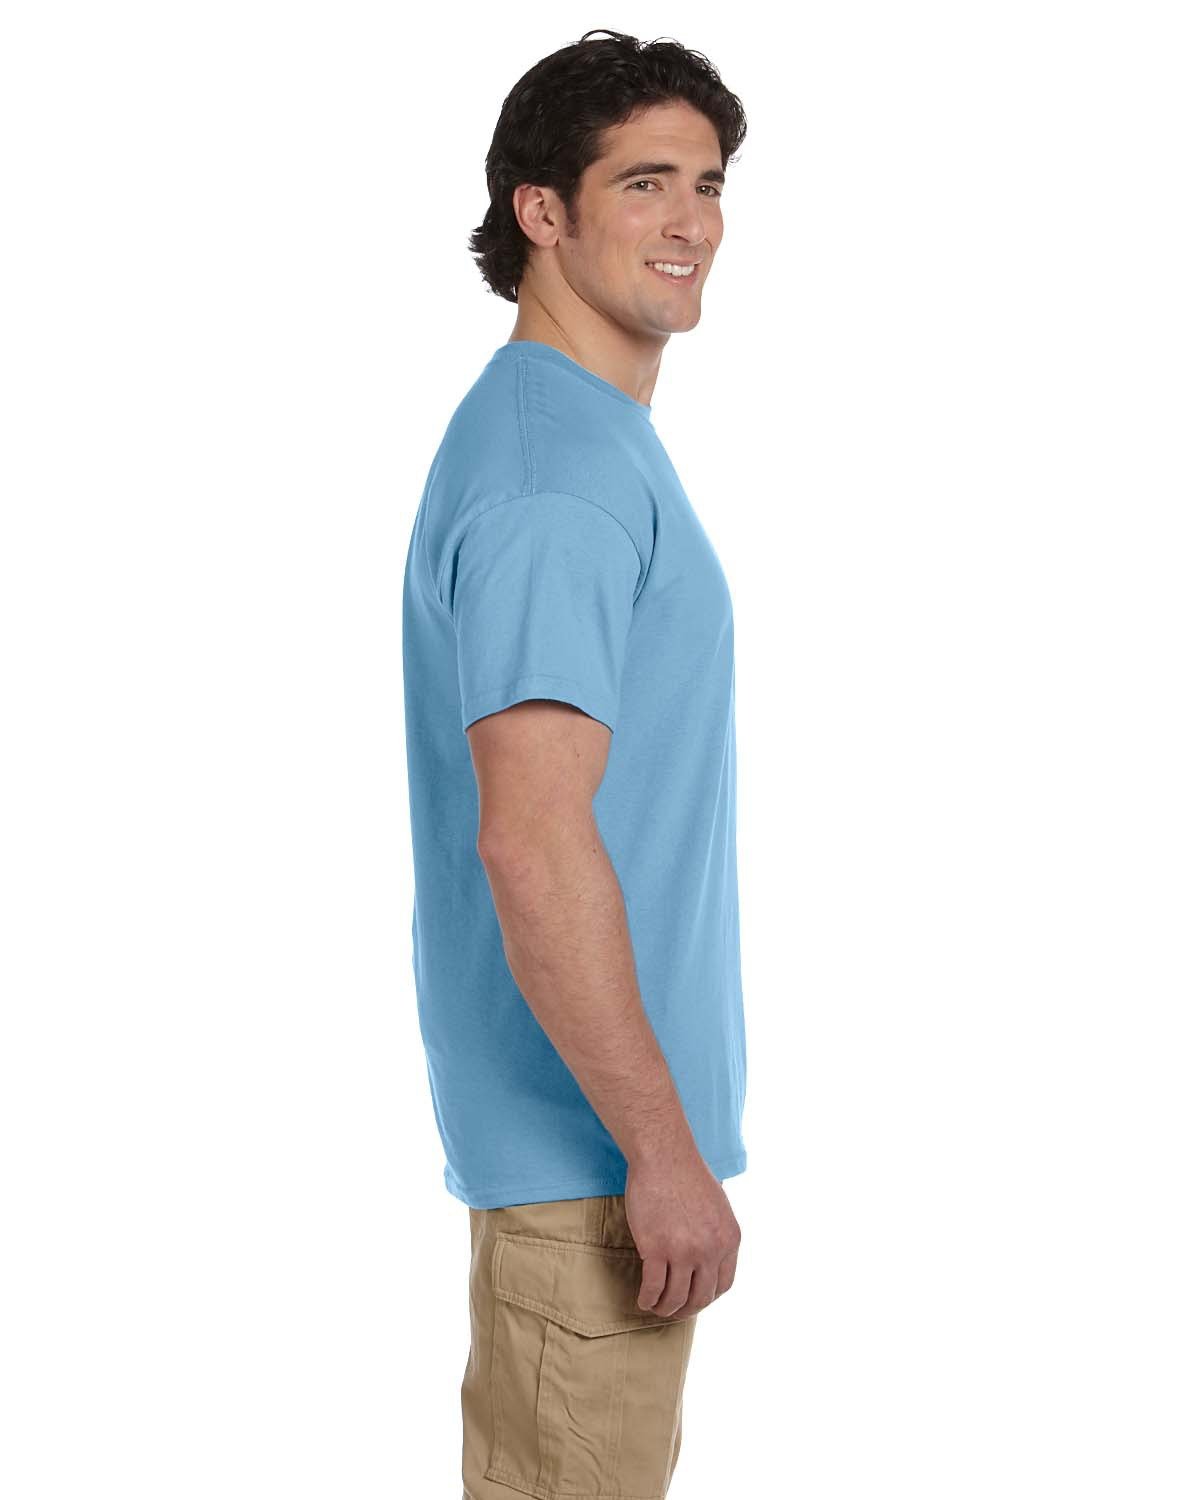 Adult HD Cotton™ T-Shirt - image 3 of 3